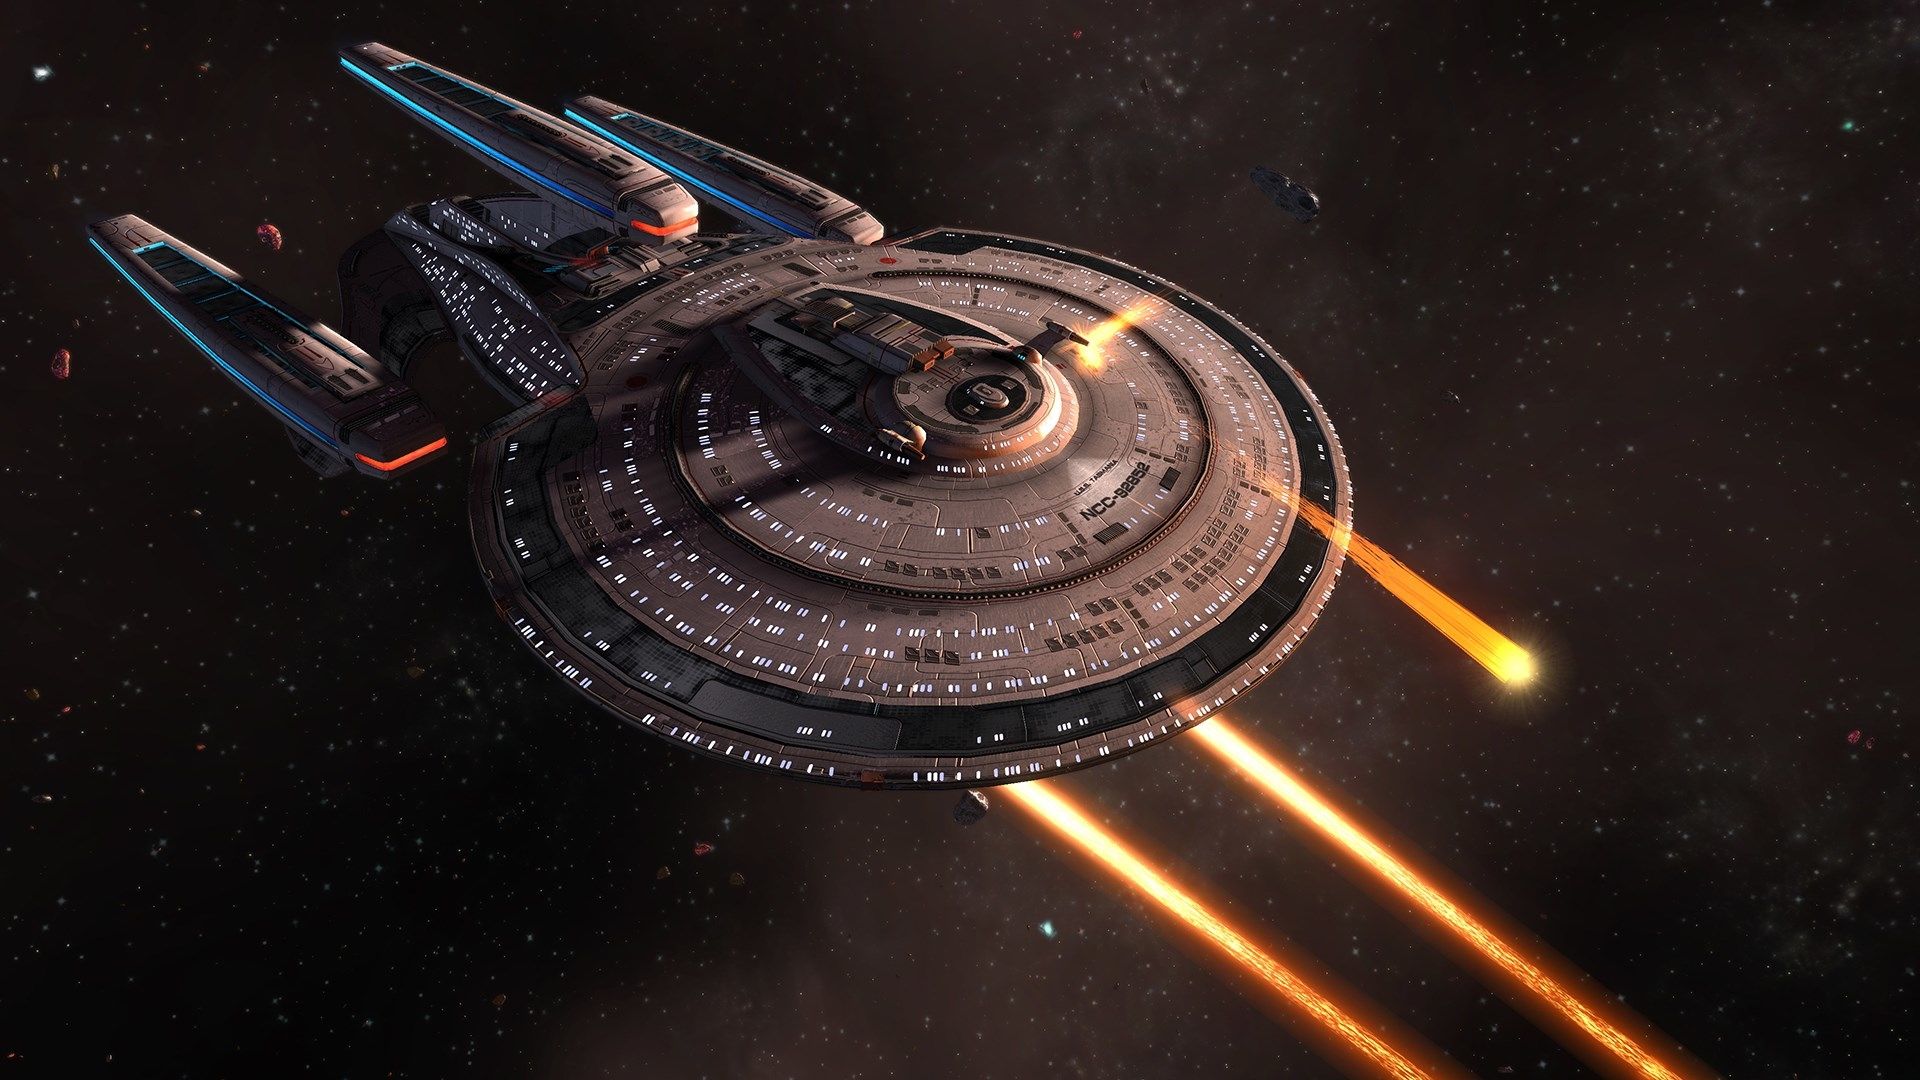 Star Trek Online Rise of Discovery 2019 Wallpaper, HD Games 4K Wallpaper, Image, Photo and Background